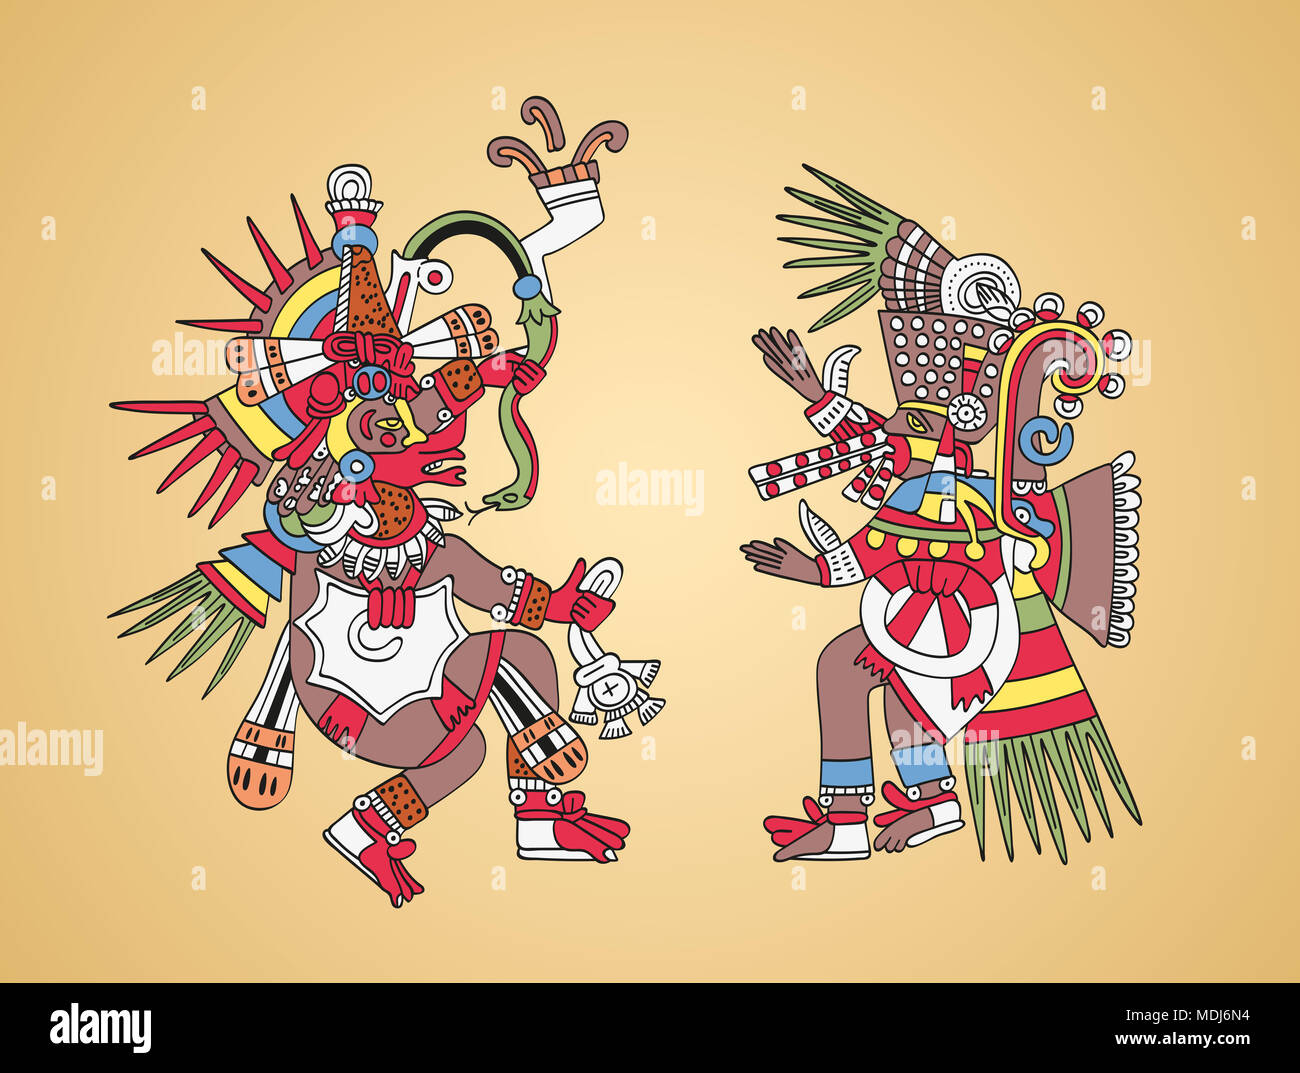 Quetzalcoatl, feathered serpent, god of Wind and Wisdom, left. Tezcatlipoca, Smoking Mirror, god of Magic and Darkness, right. Twin brothers. Stock Photo